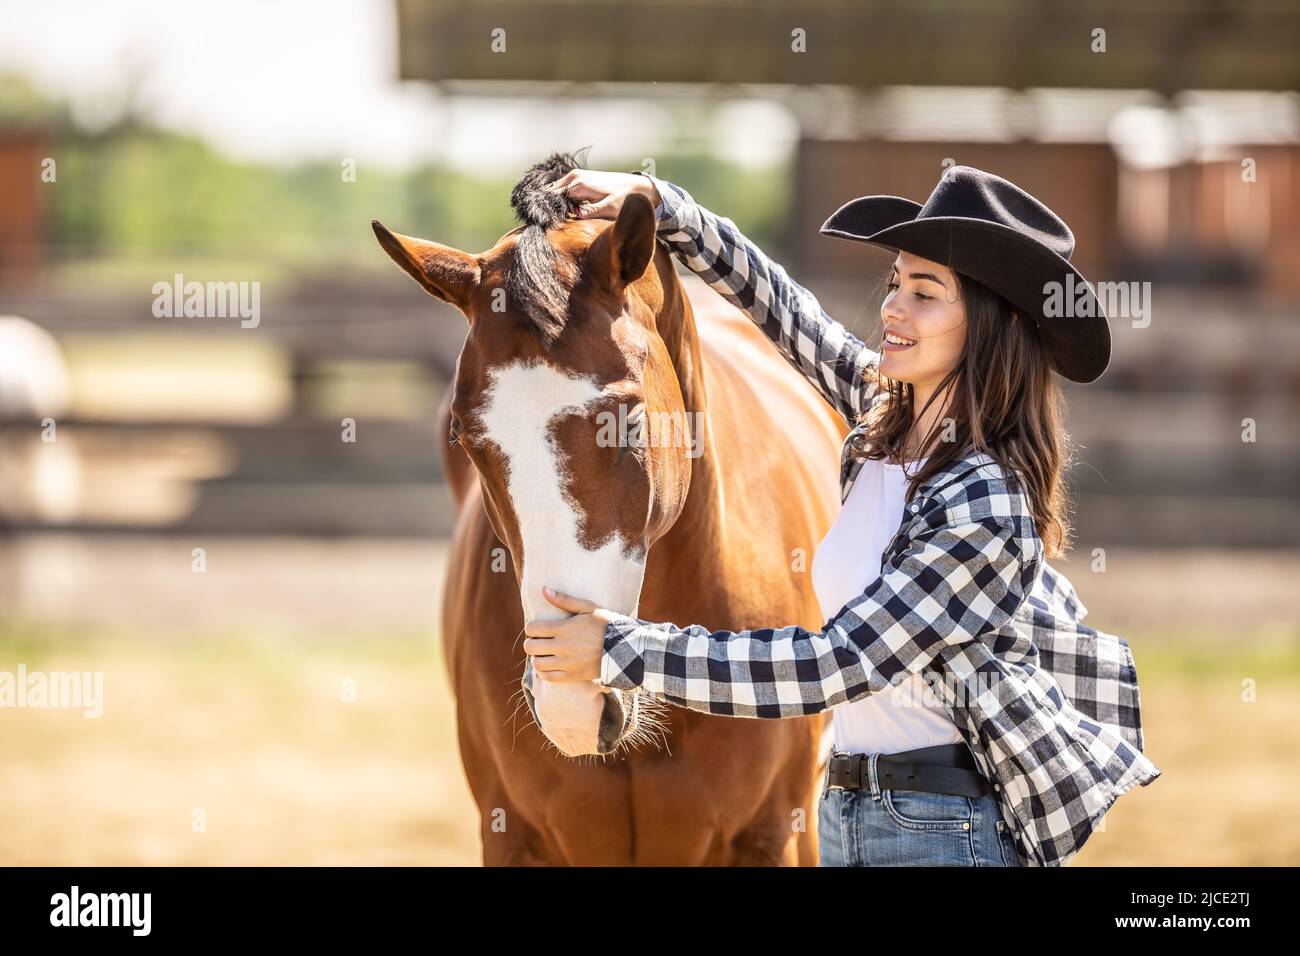 Young woman brushes her paint horse outdoors on a farm. Stock Photo